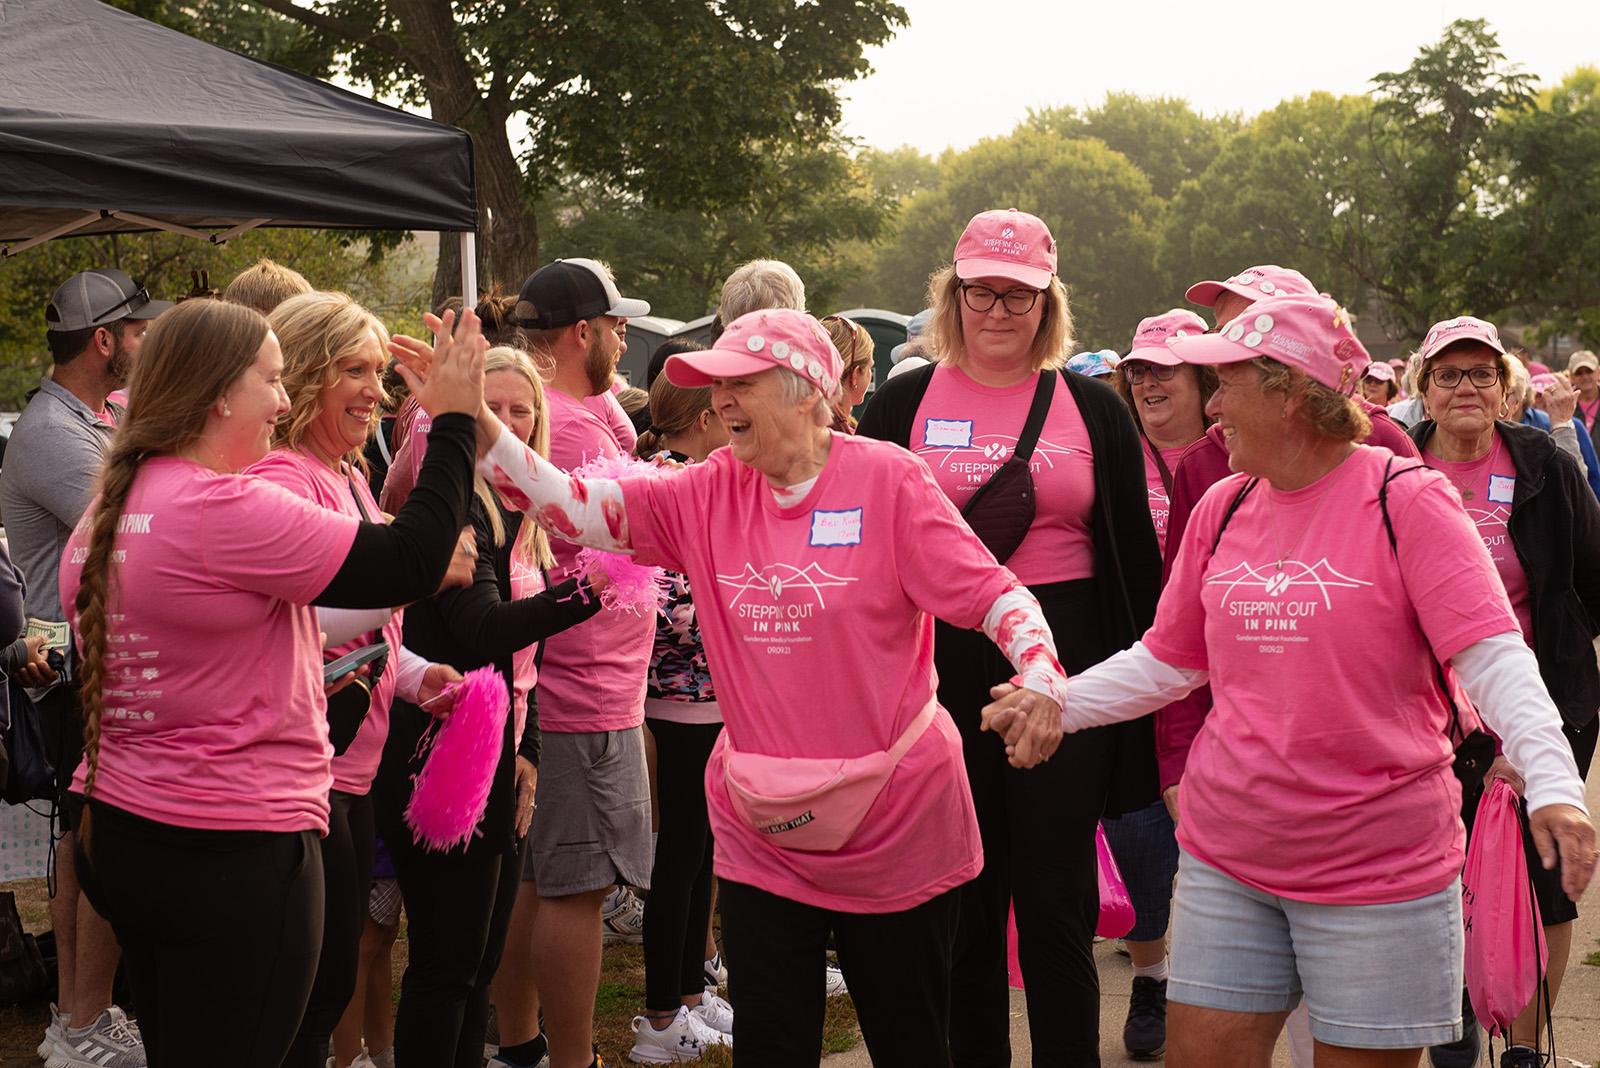 Women celebrating at Steppin' Out in Pink event